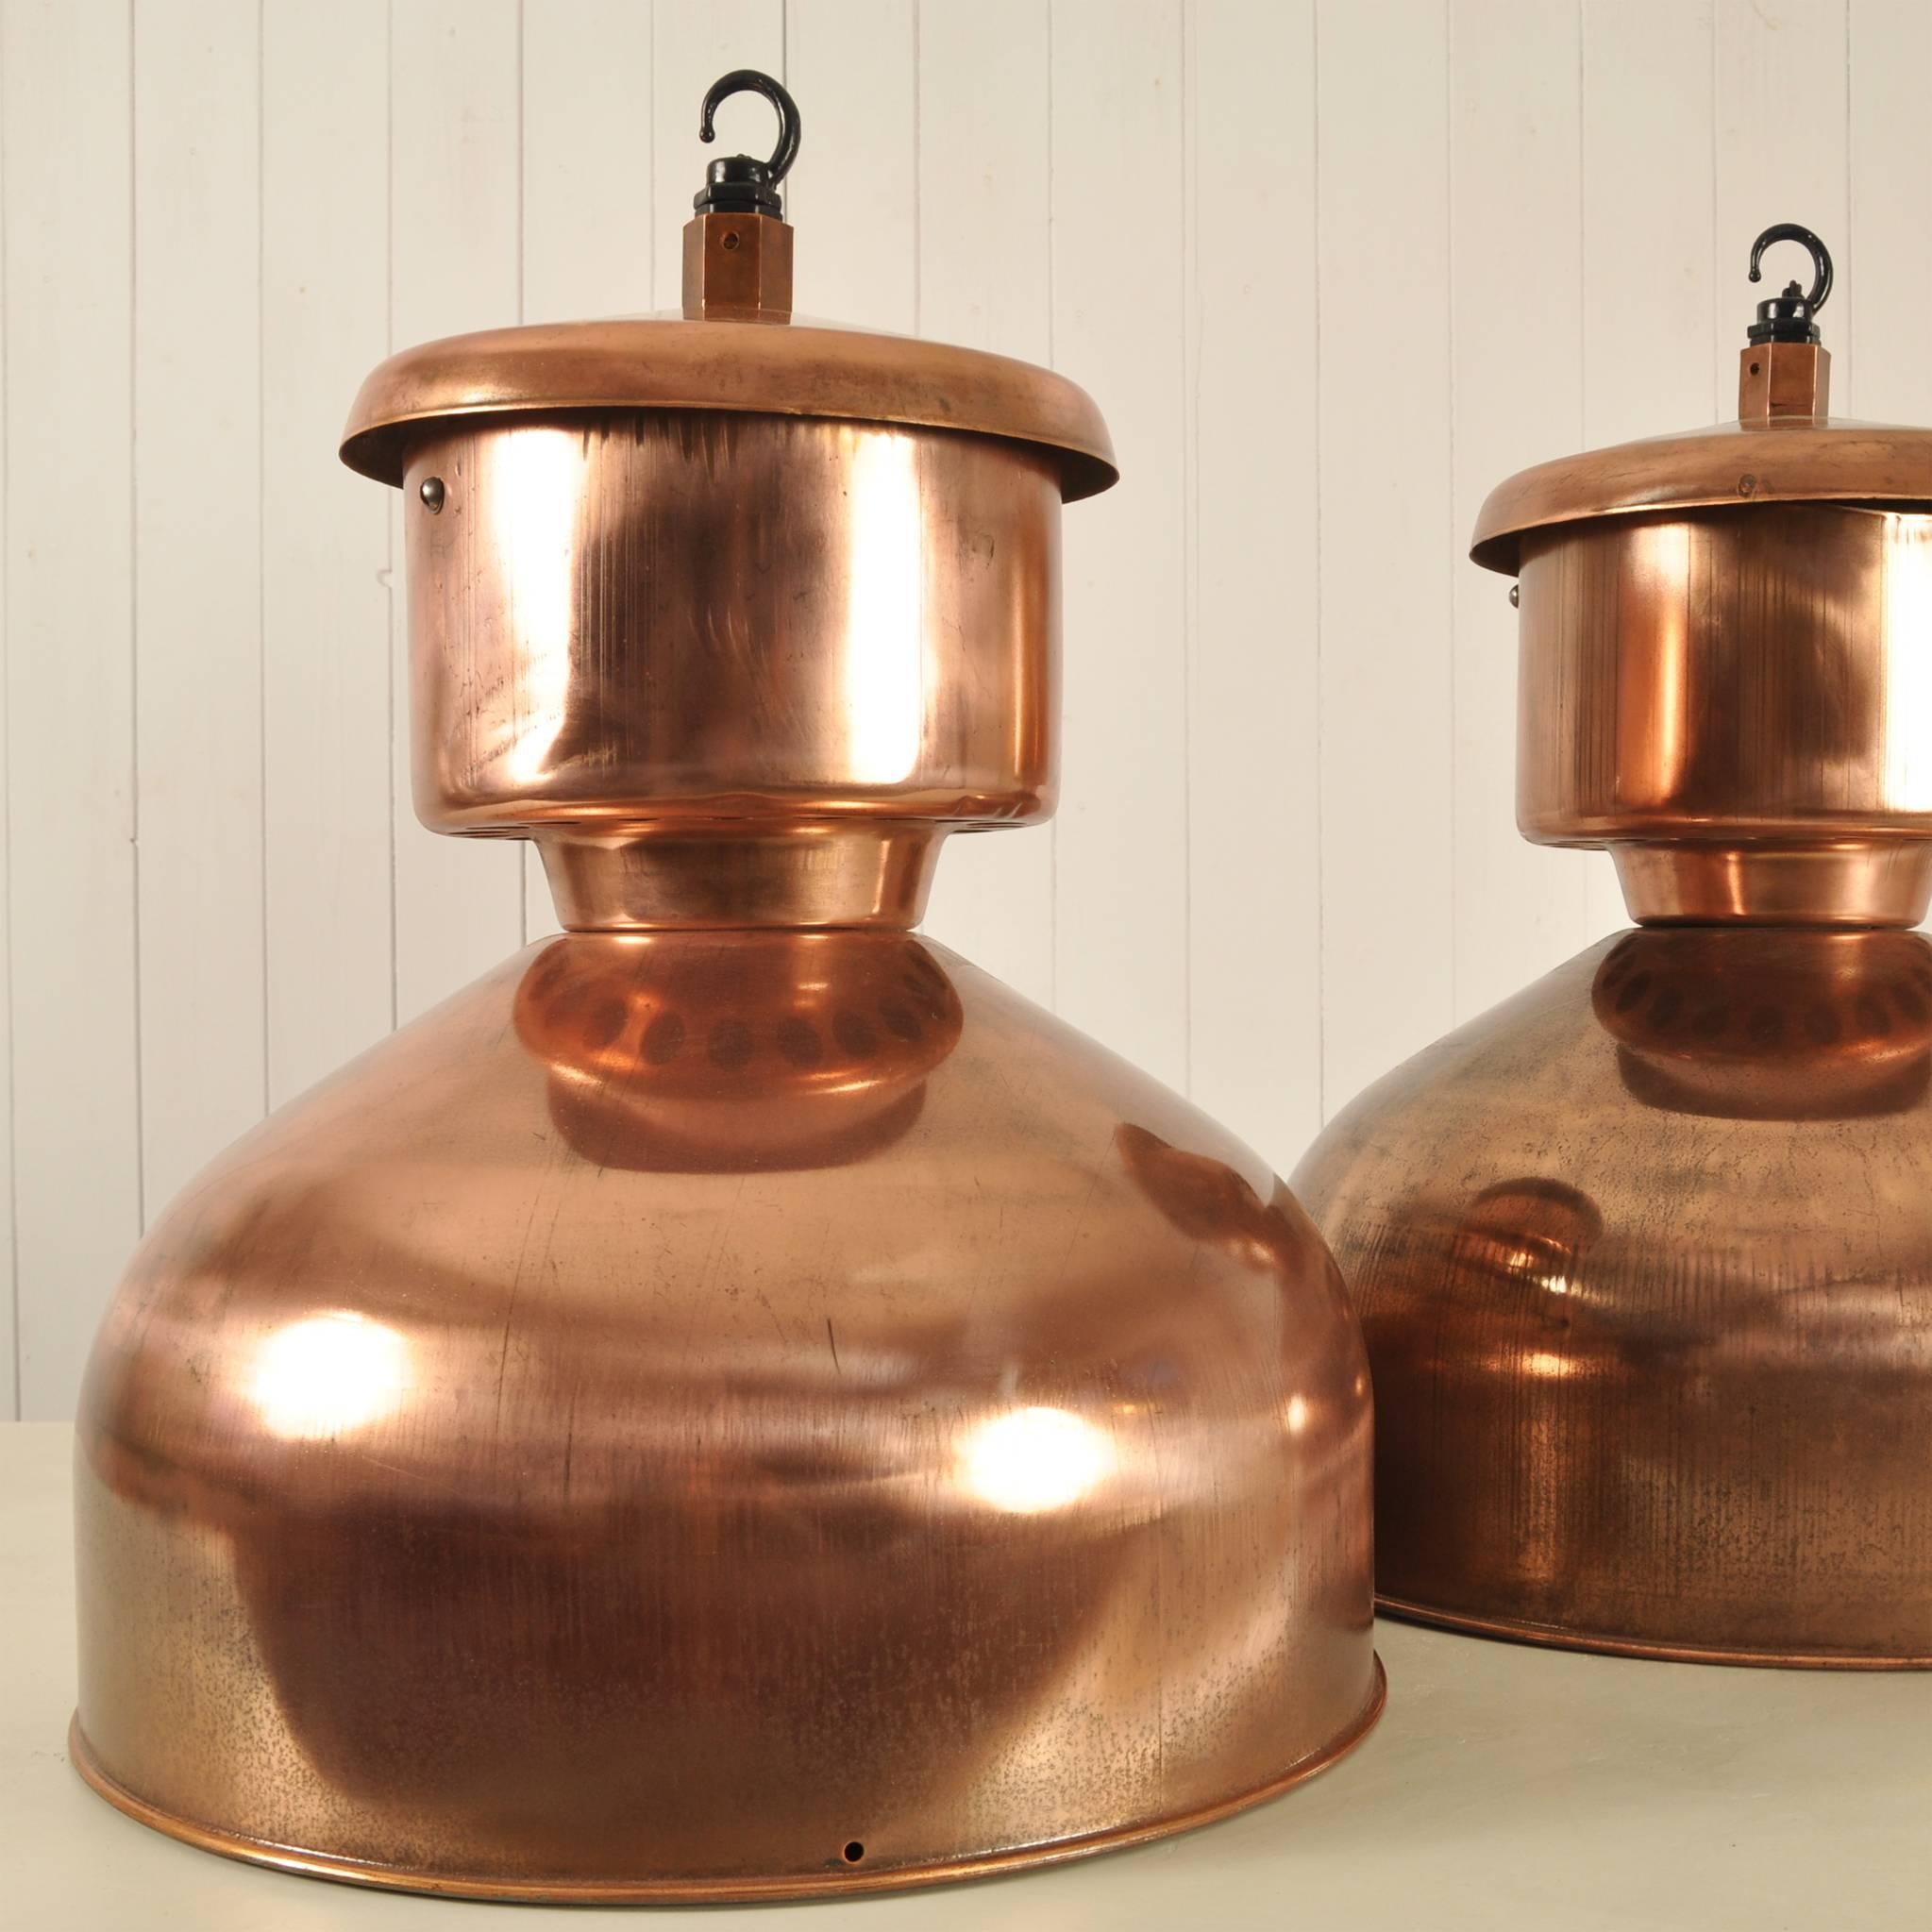 A new idea for us. We have taken some midcentury vintage enamel industrial lights and had them sand blasted and then copper-plated. 

We are really pleased with the results and will be shortly installing some of these into a project at